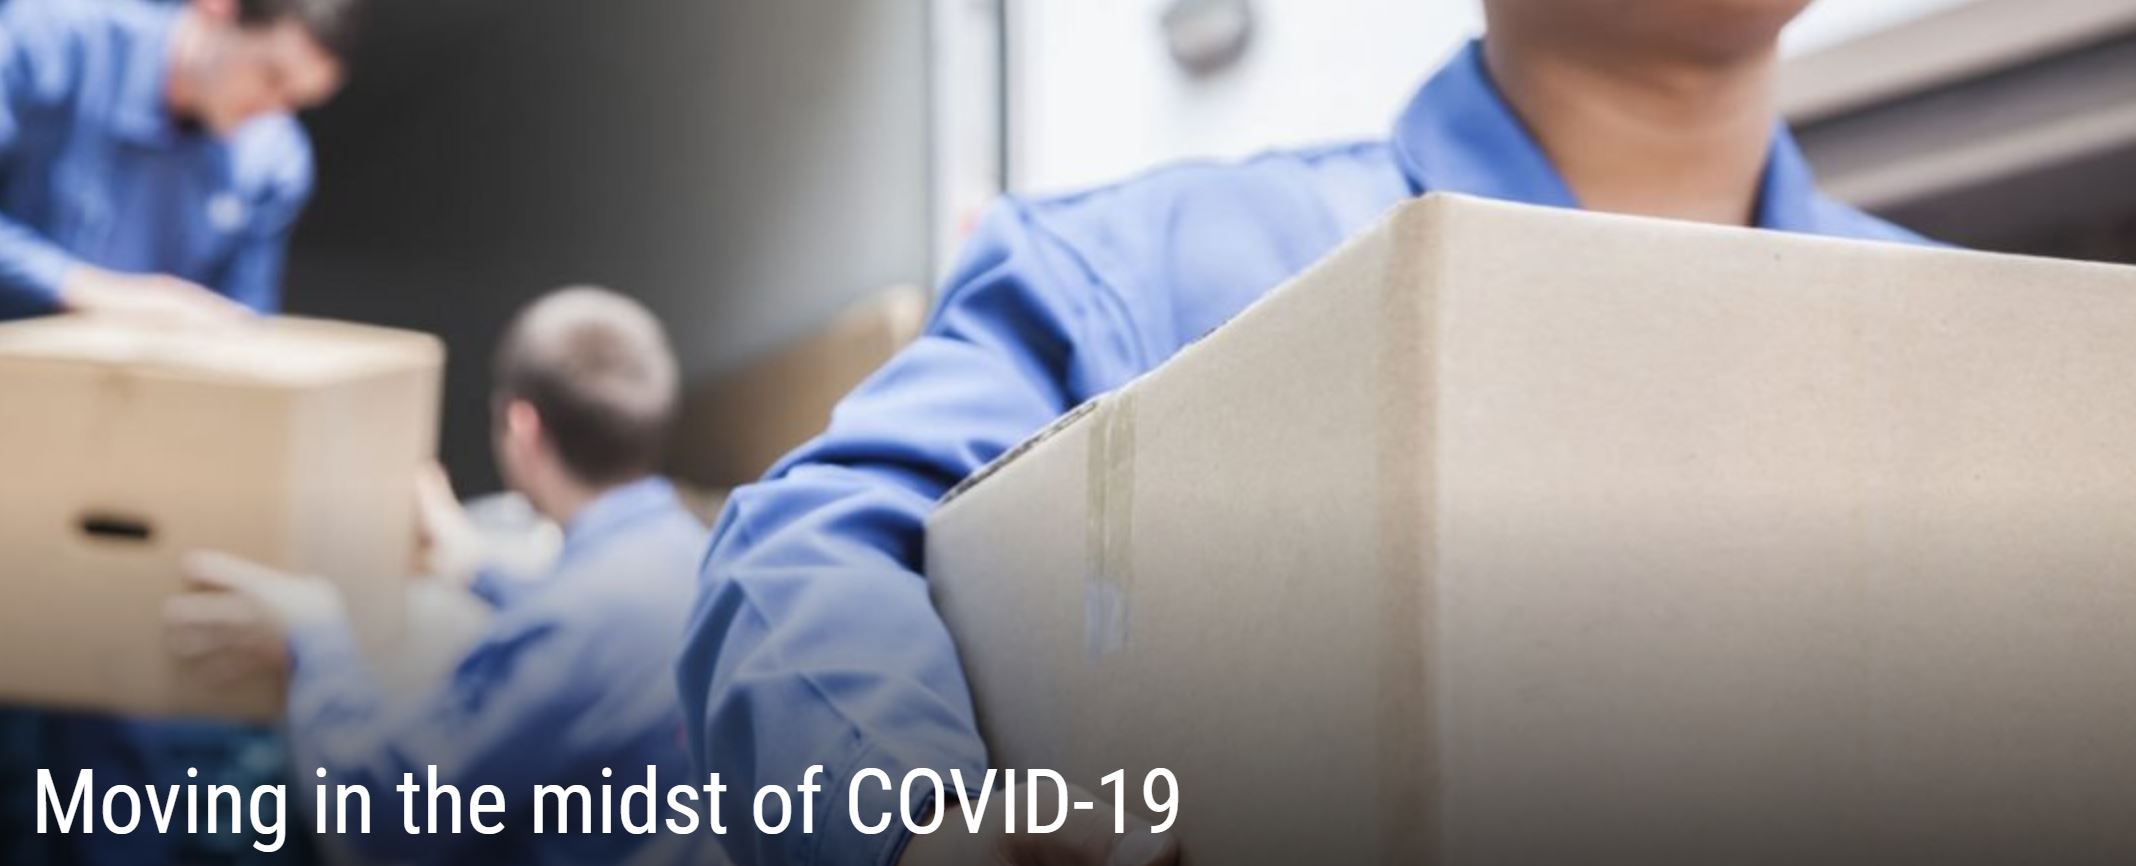 Moving In the Midst of COVID-19